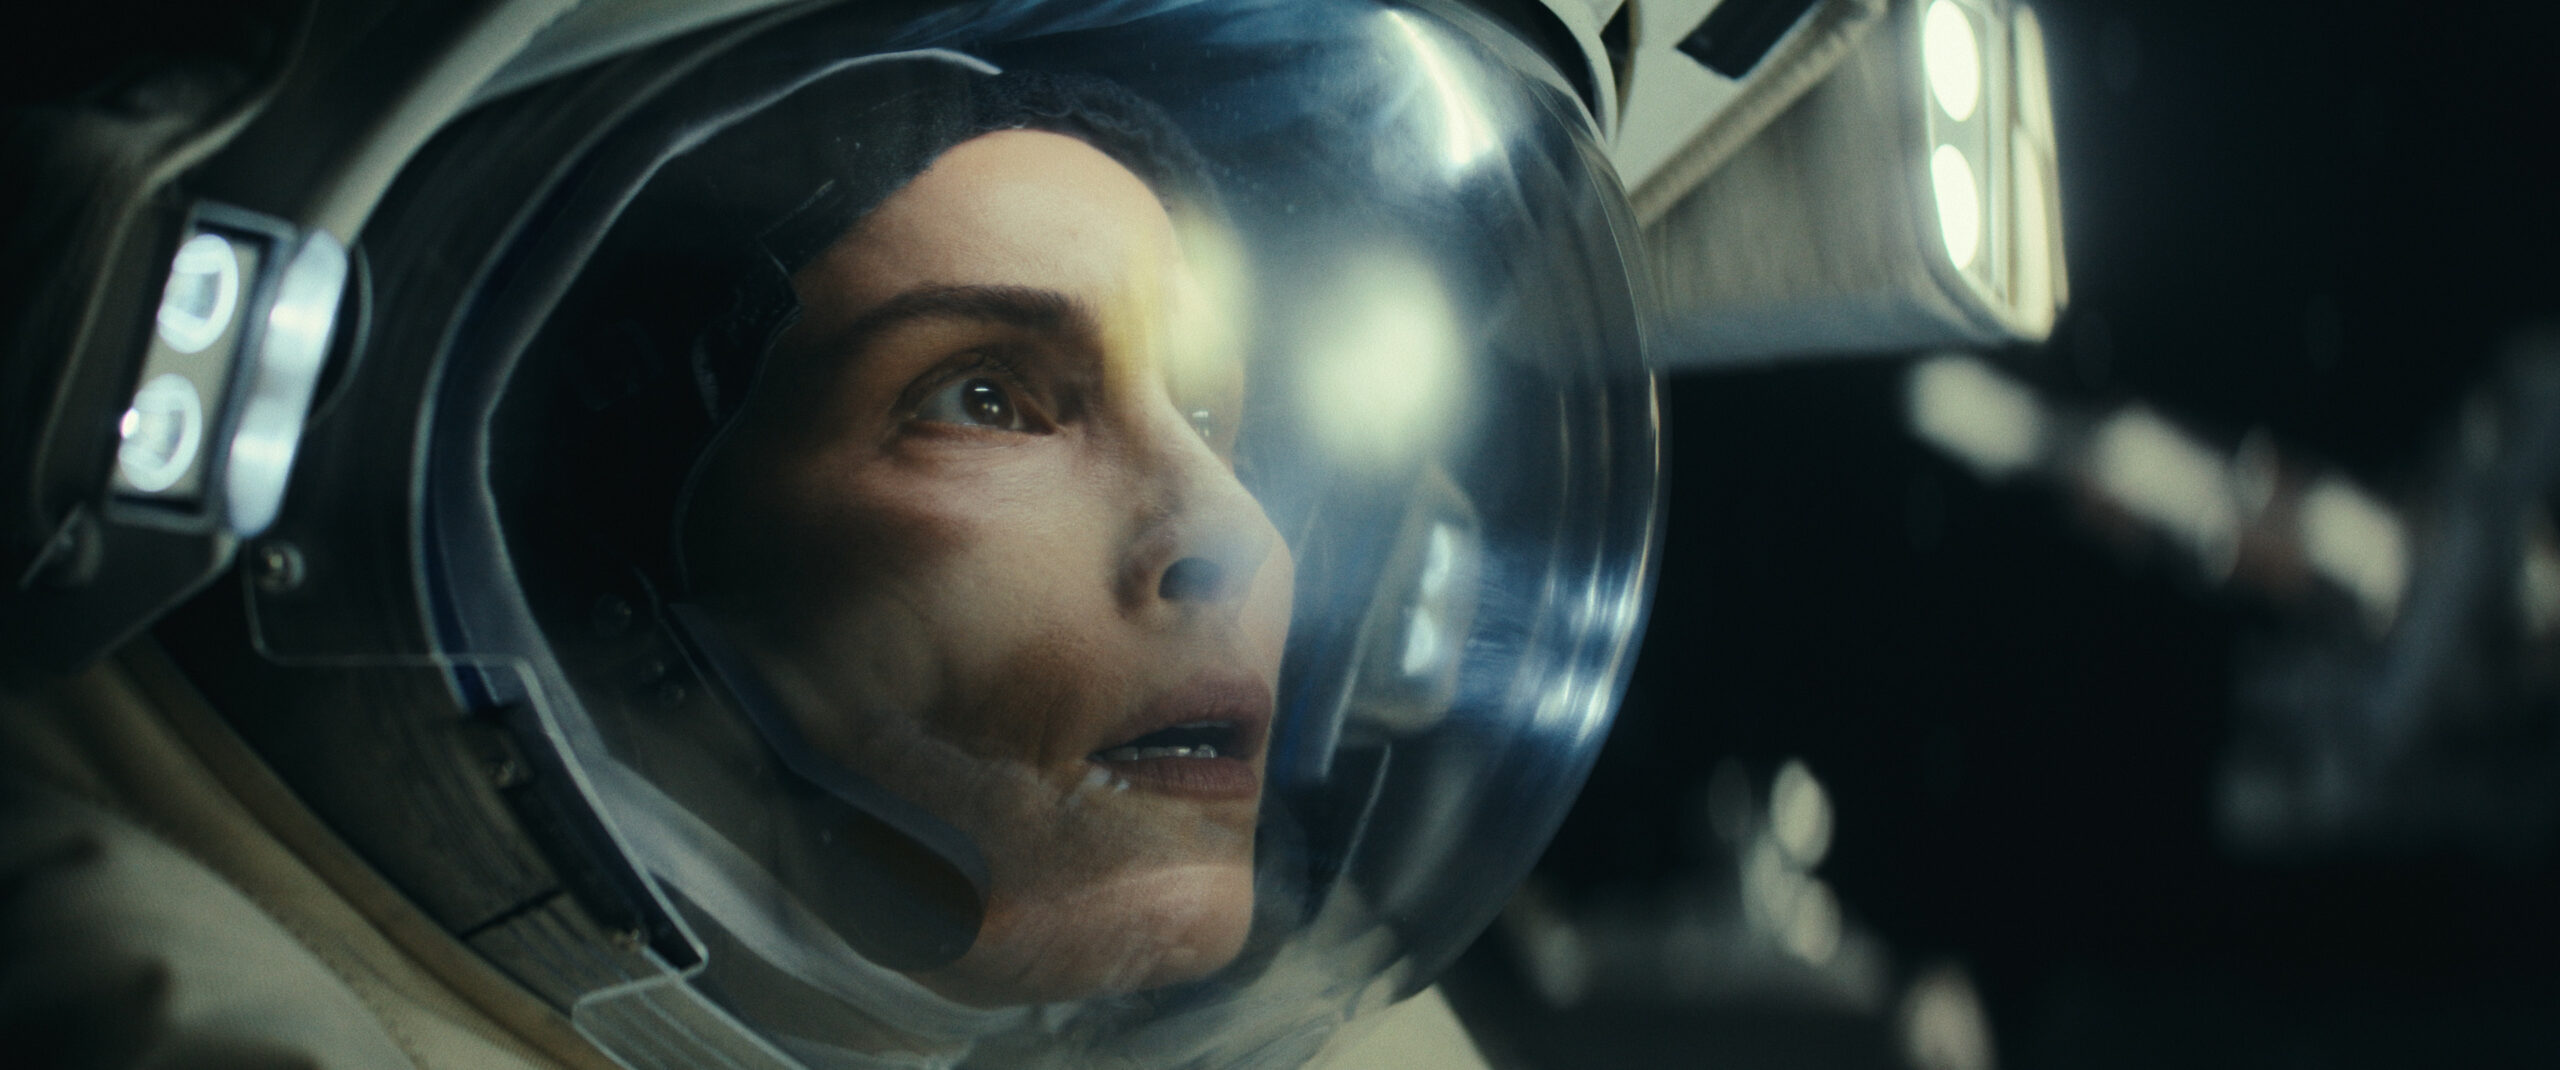 Constellation - Noomi Rapace as Jo